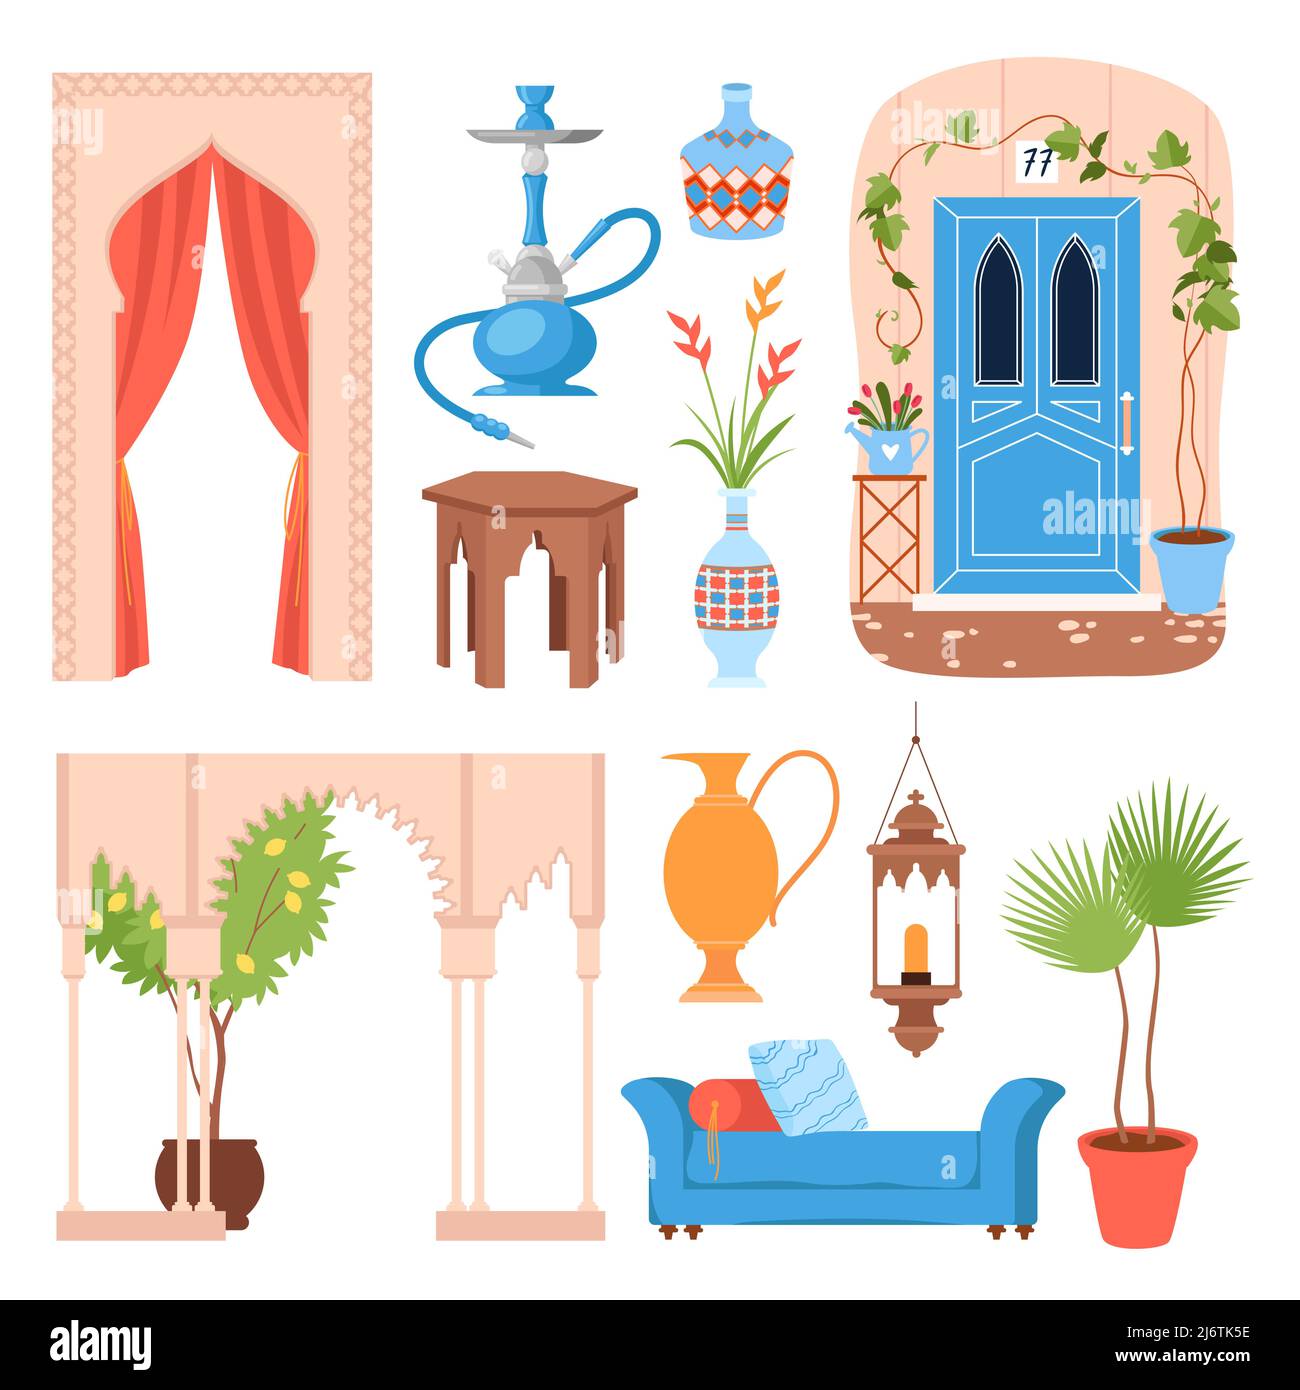 Moroccan set of traditional architecture and country symbols. Stock Vector